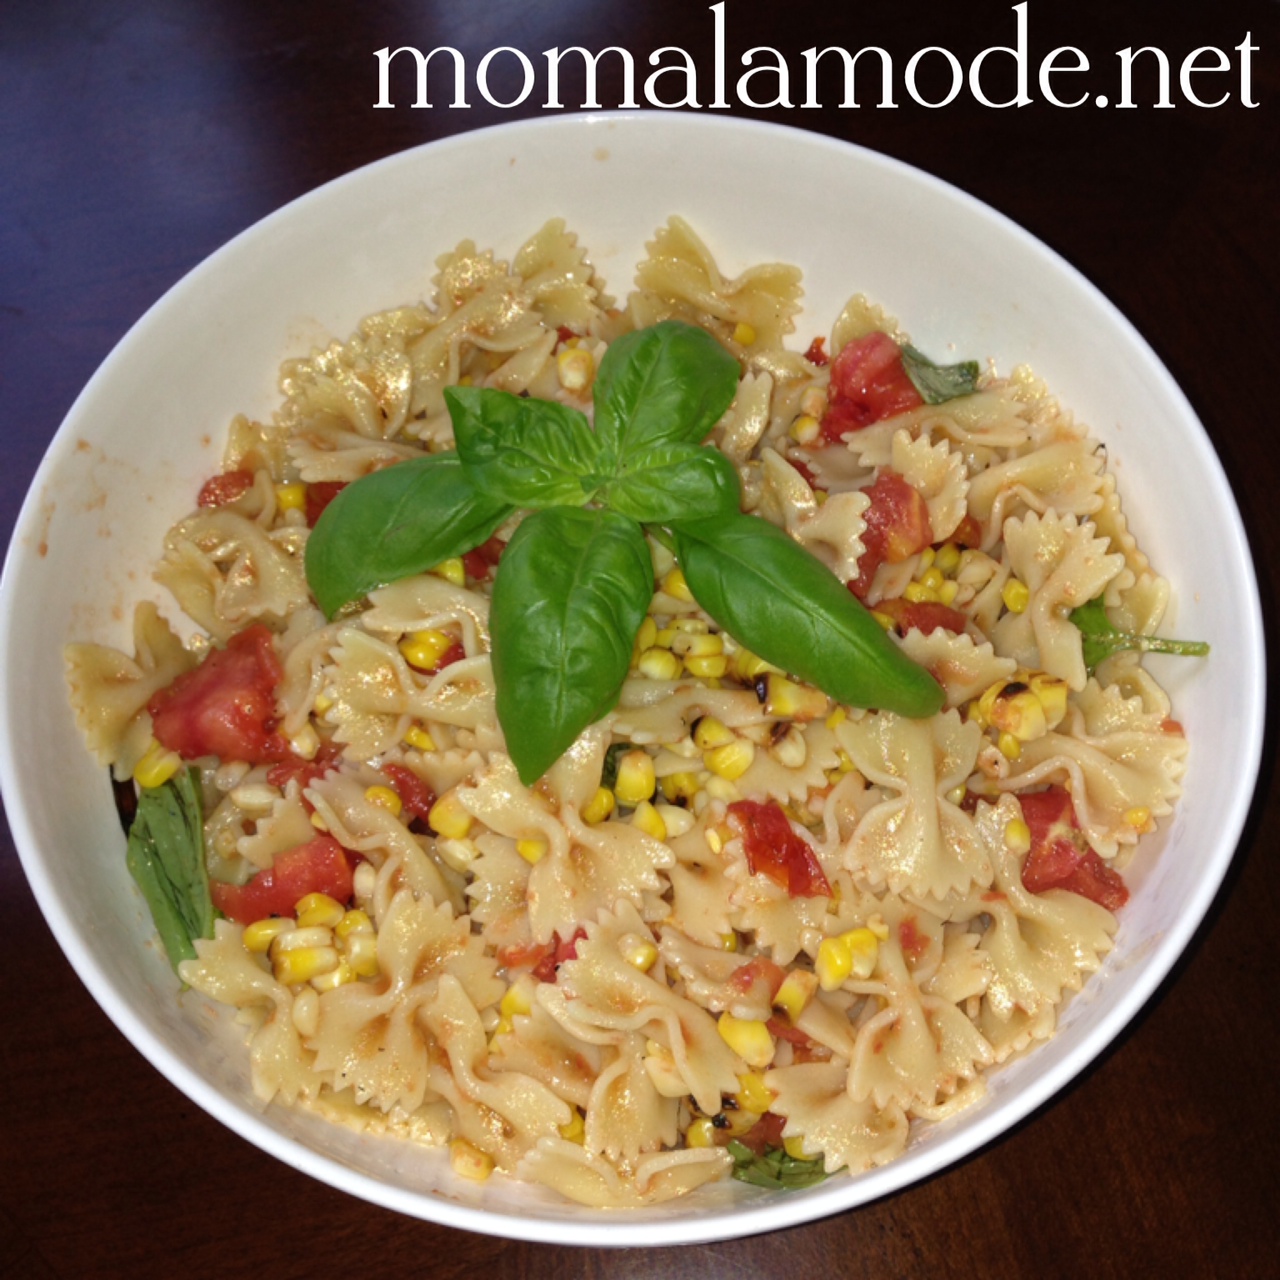 Everday Food's Grilled Tomato and Corn Pasta